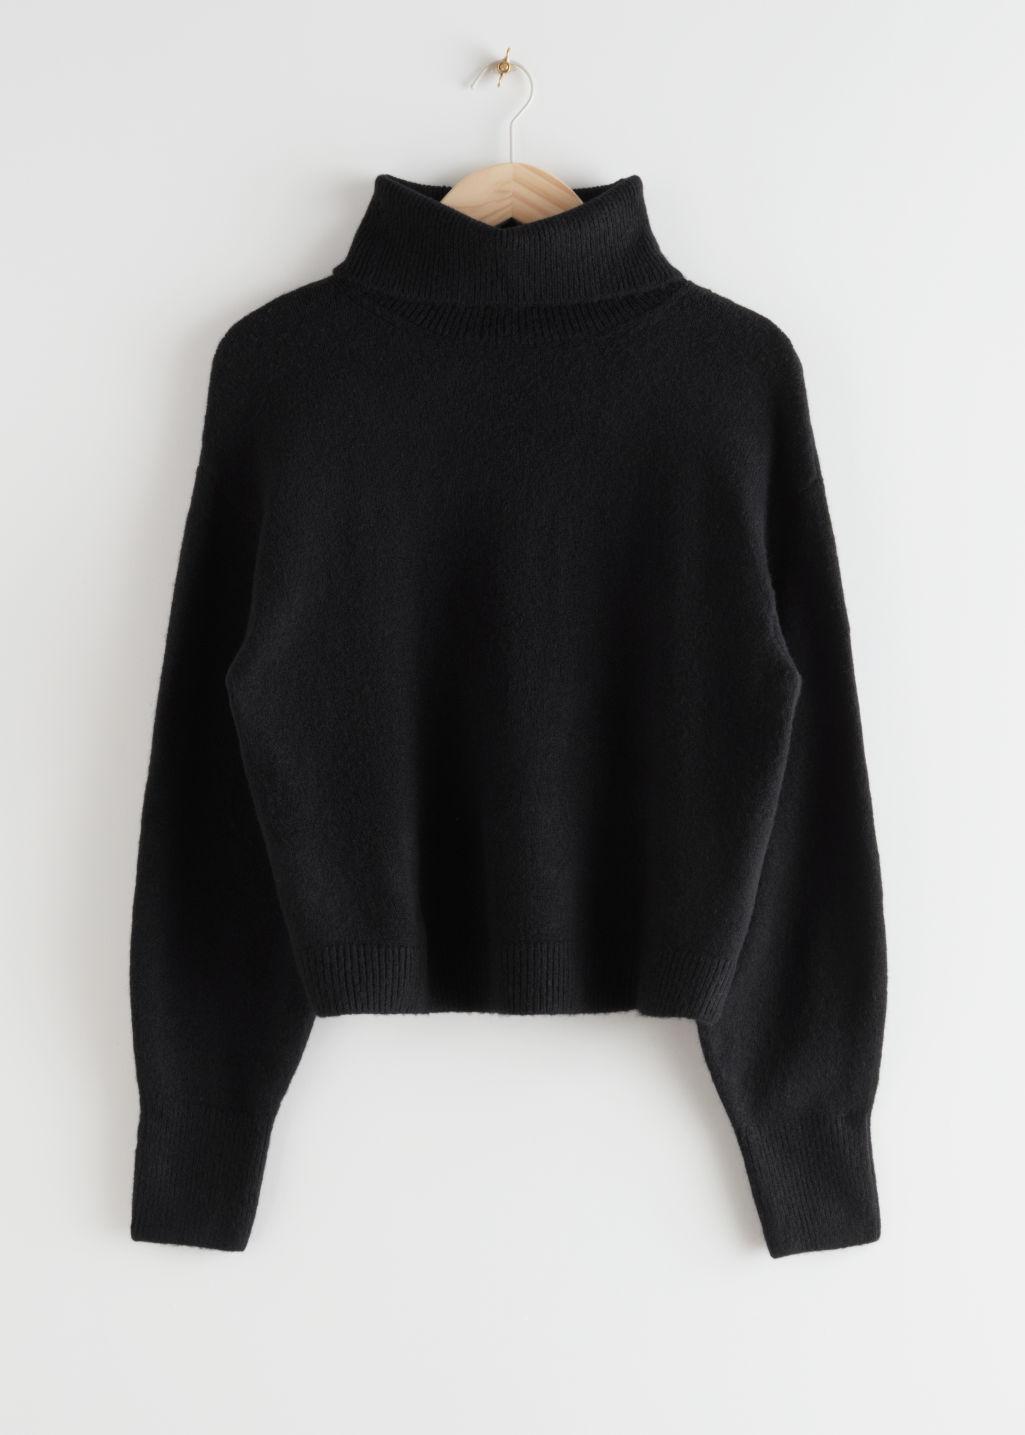 & Other Stories Oversized Cut Out Turtleneck Sweater in Black - Lyst